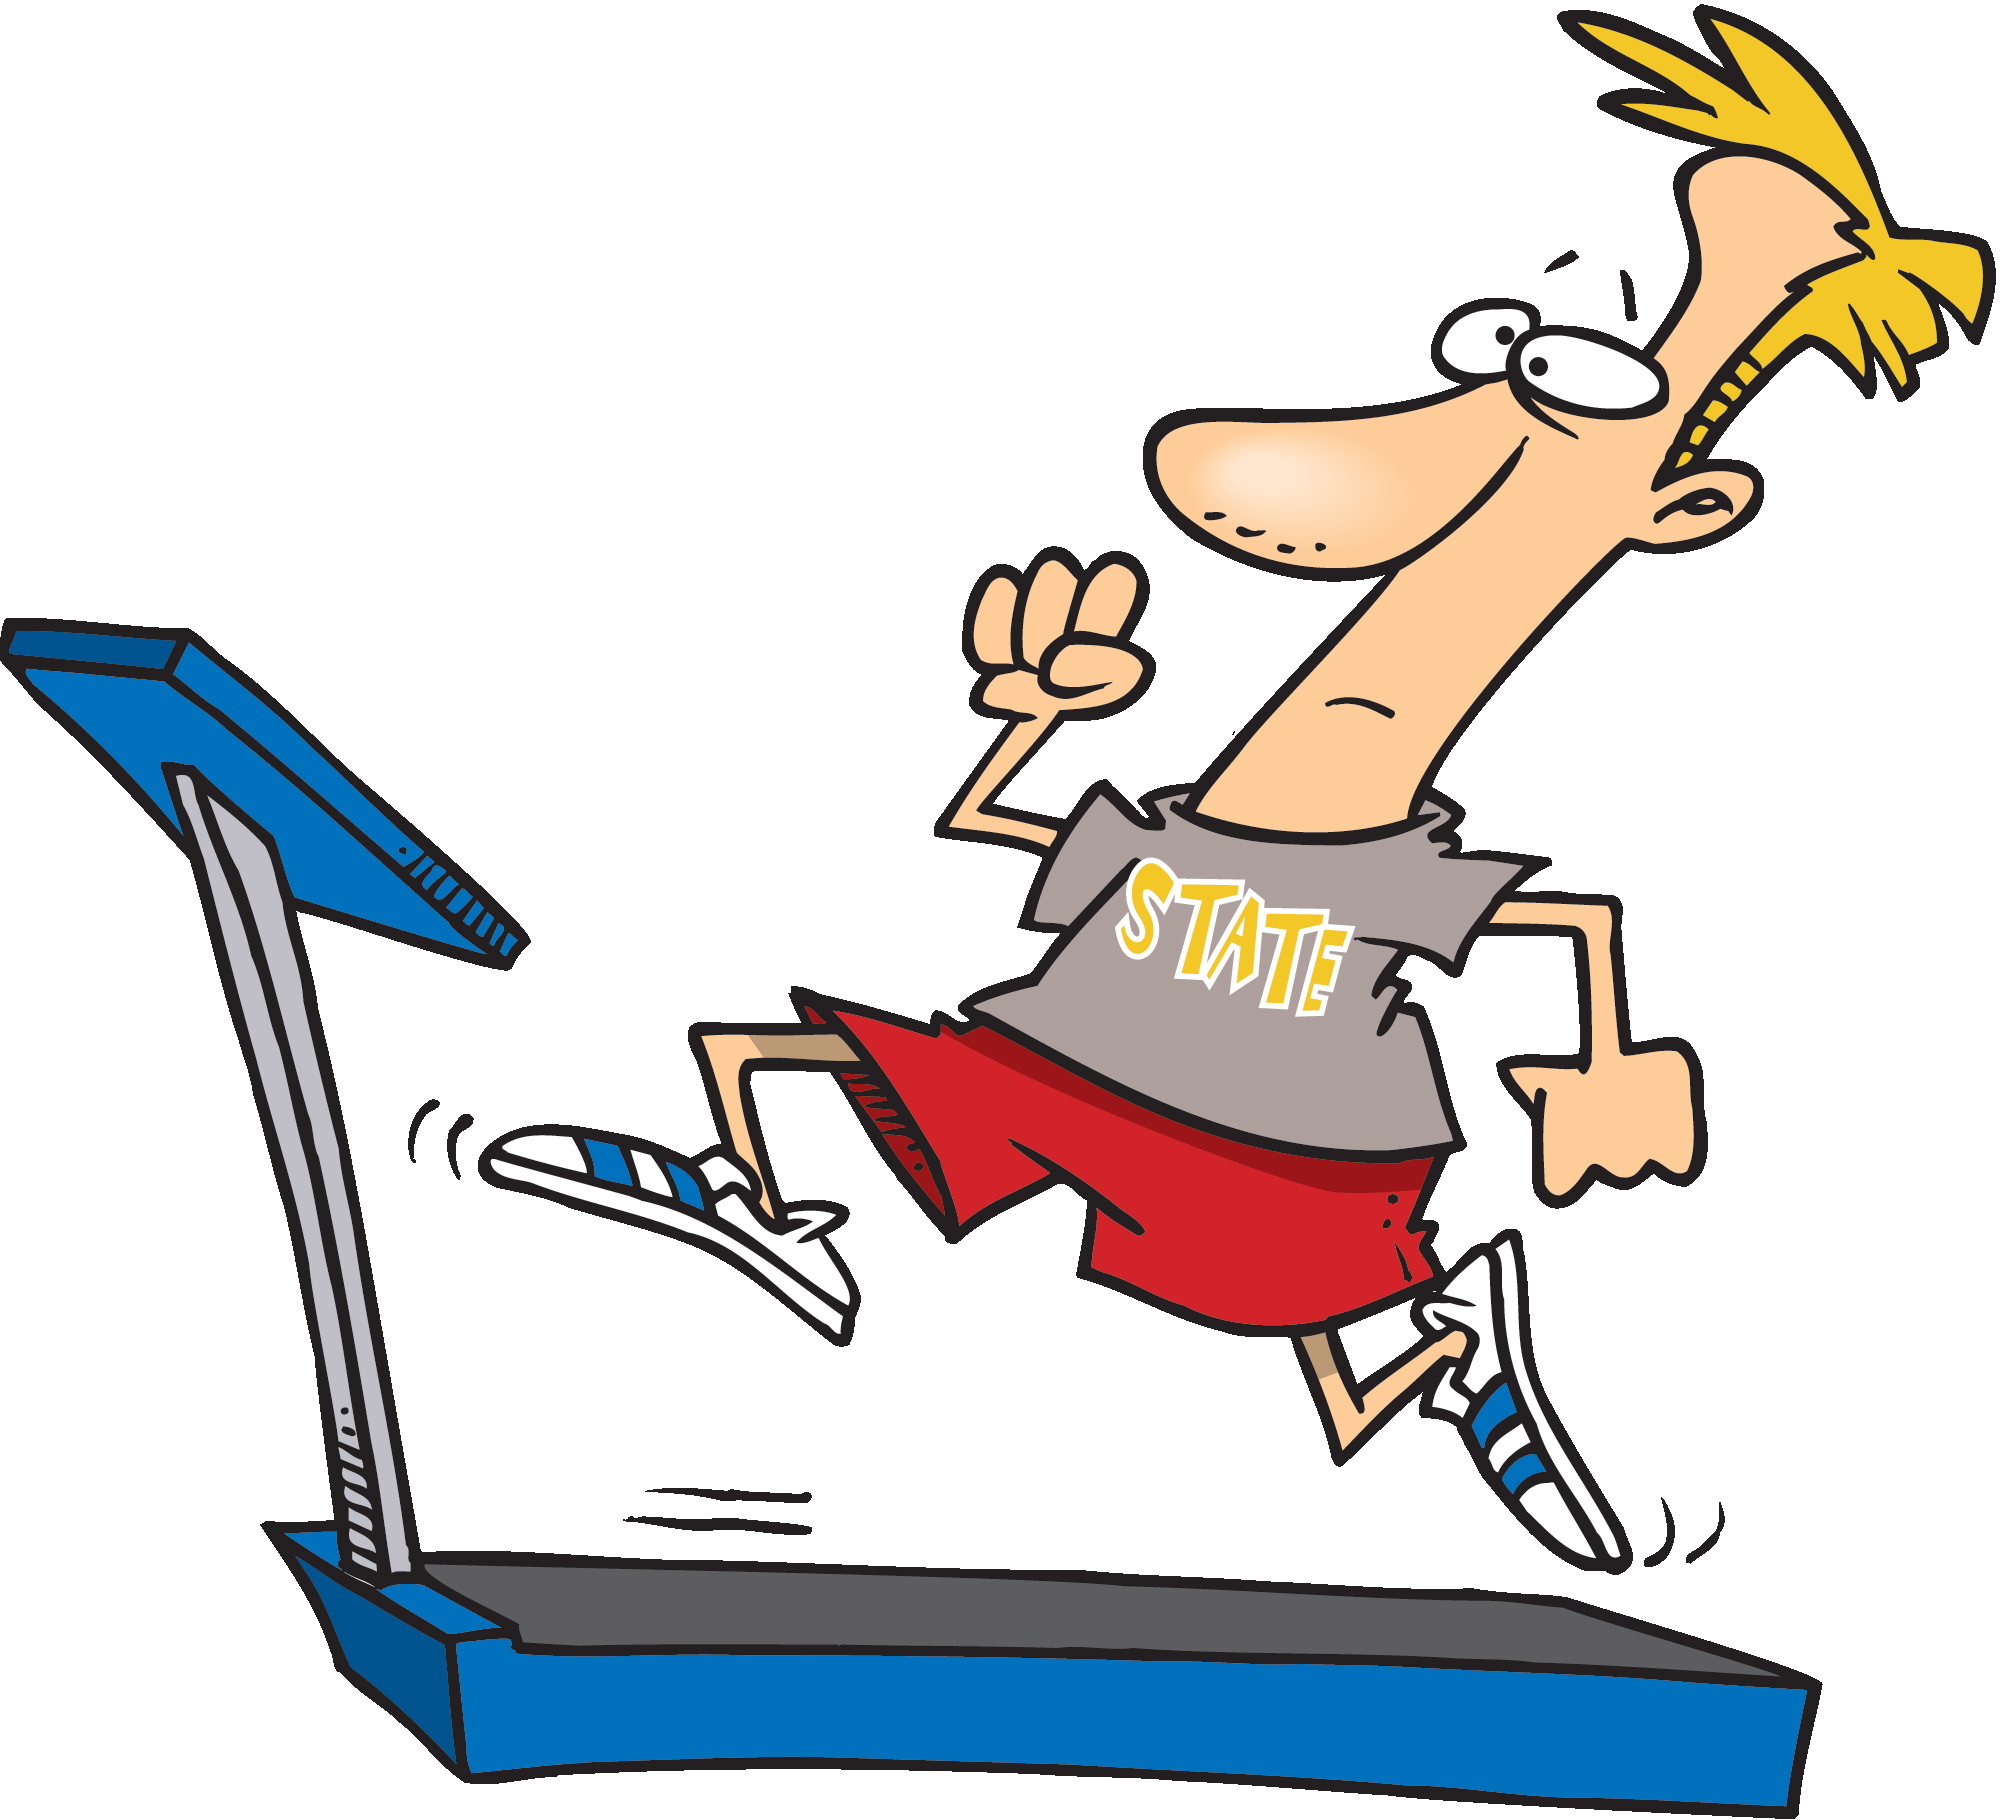 health and fitness clipart - photo #44